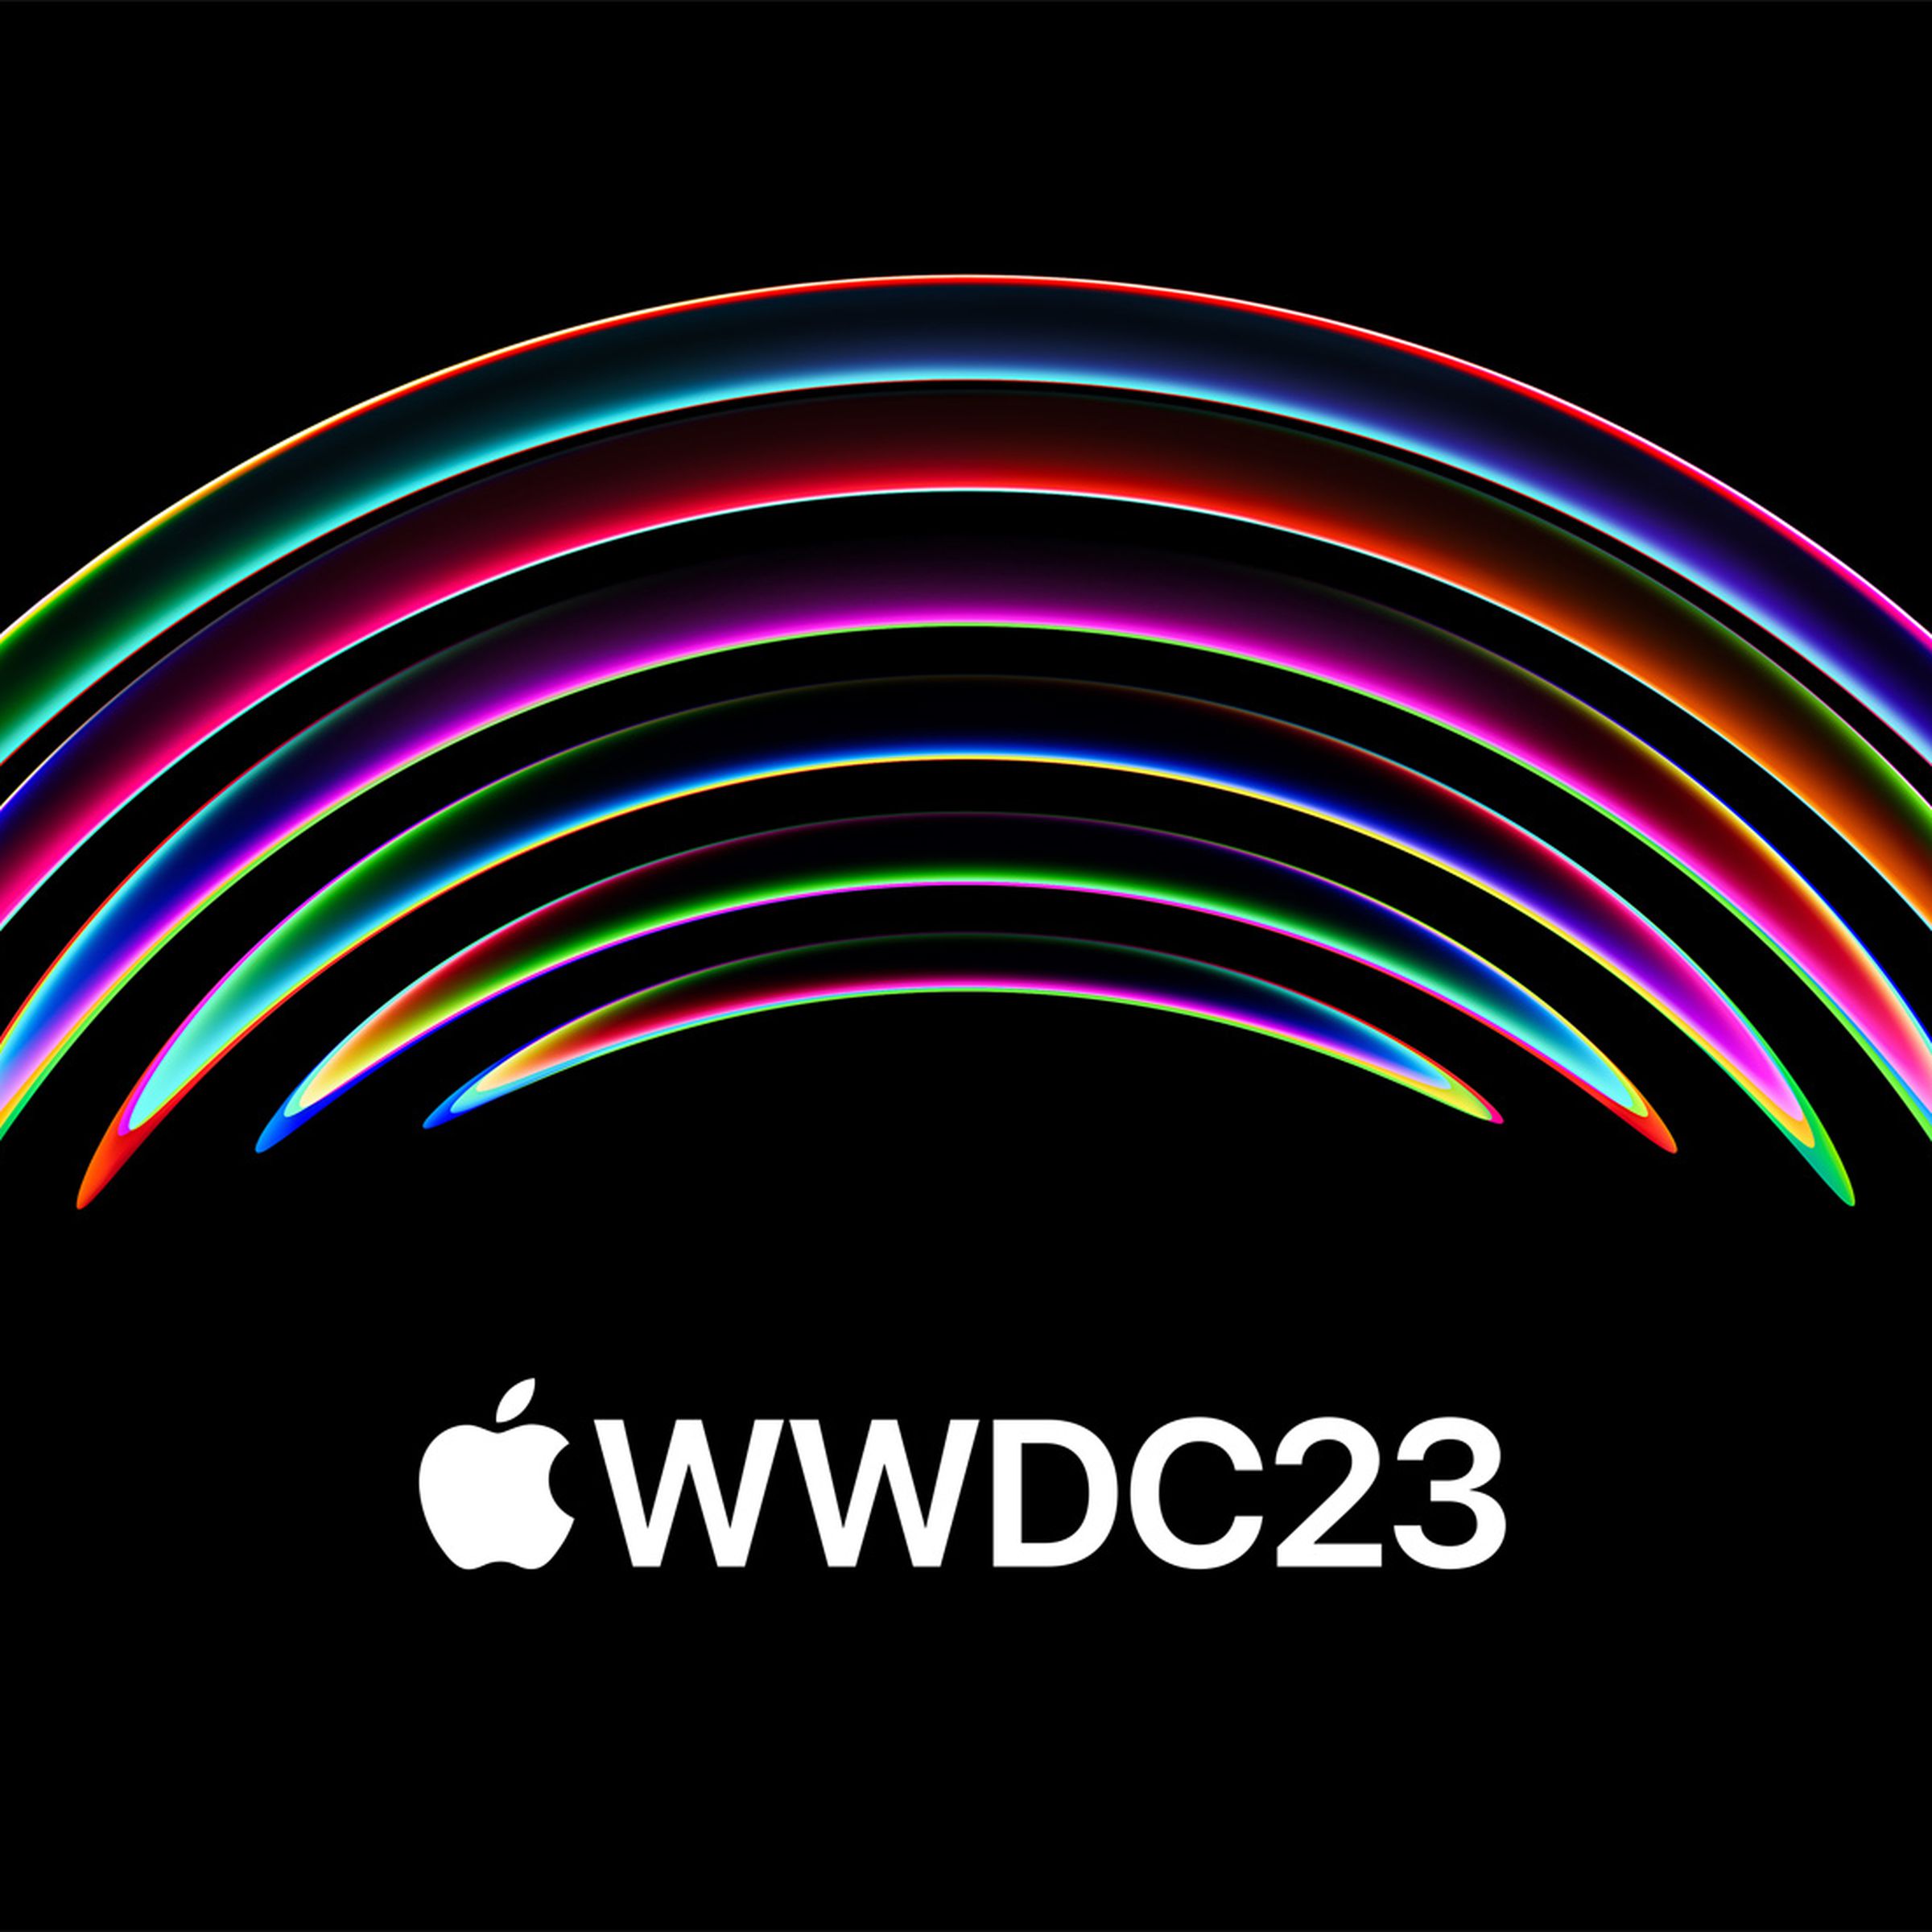 An image showing the WWDC 2023 logo